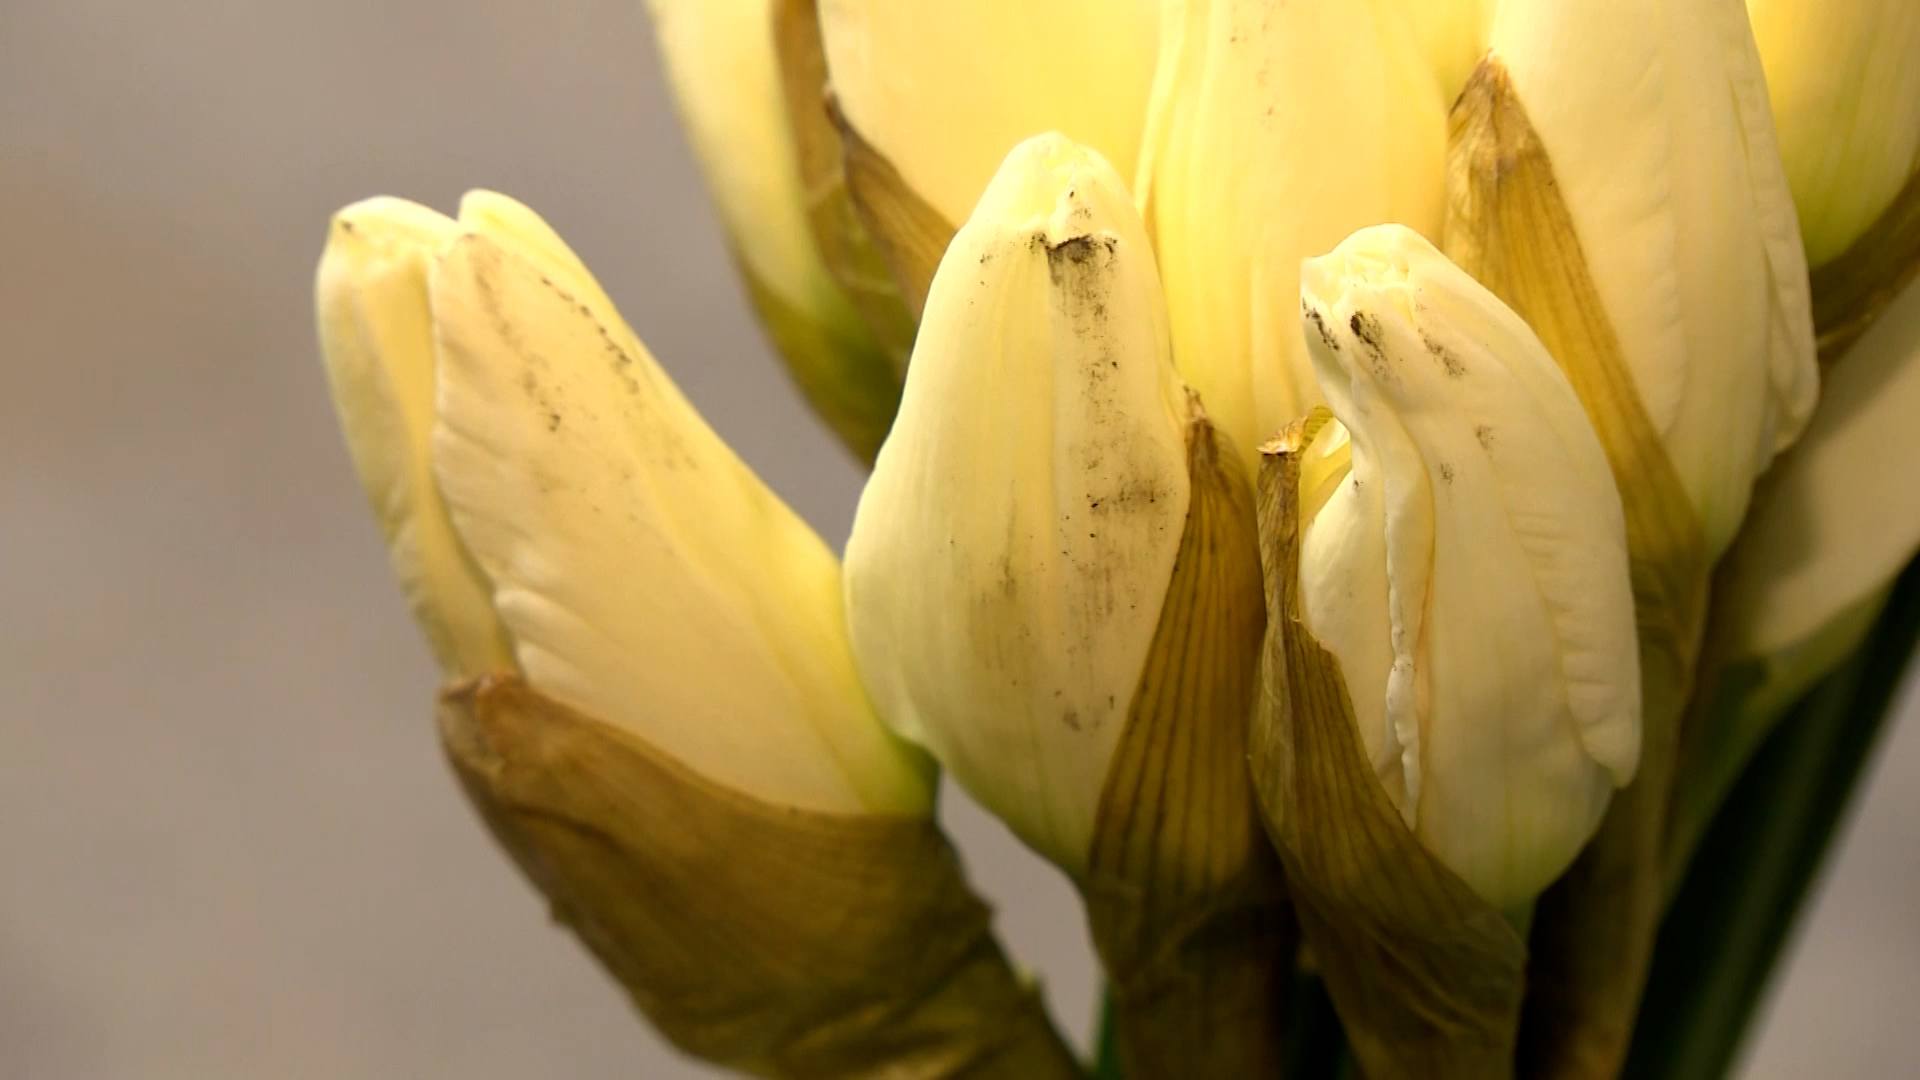 A good percentage of daffodils won't open thanks to the disease caused by long-term cold storage.